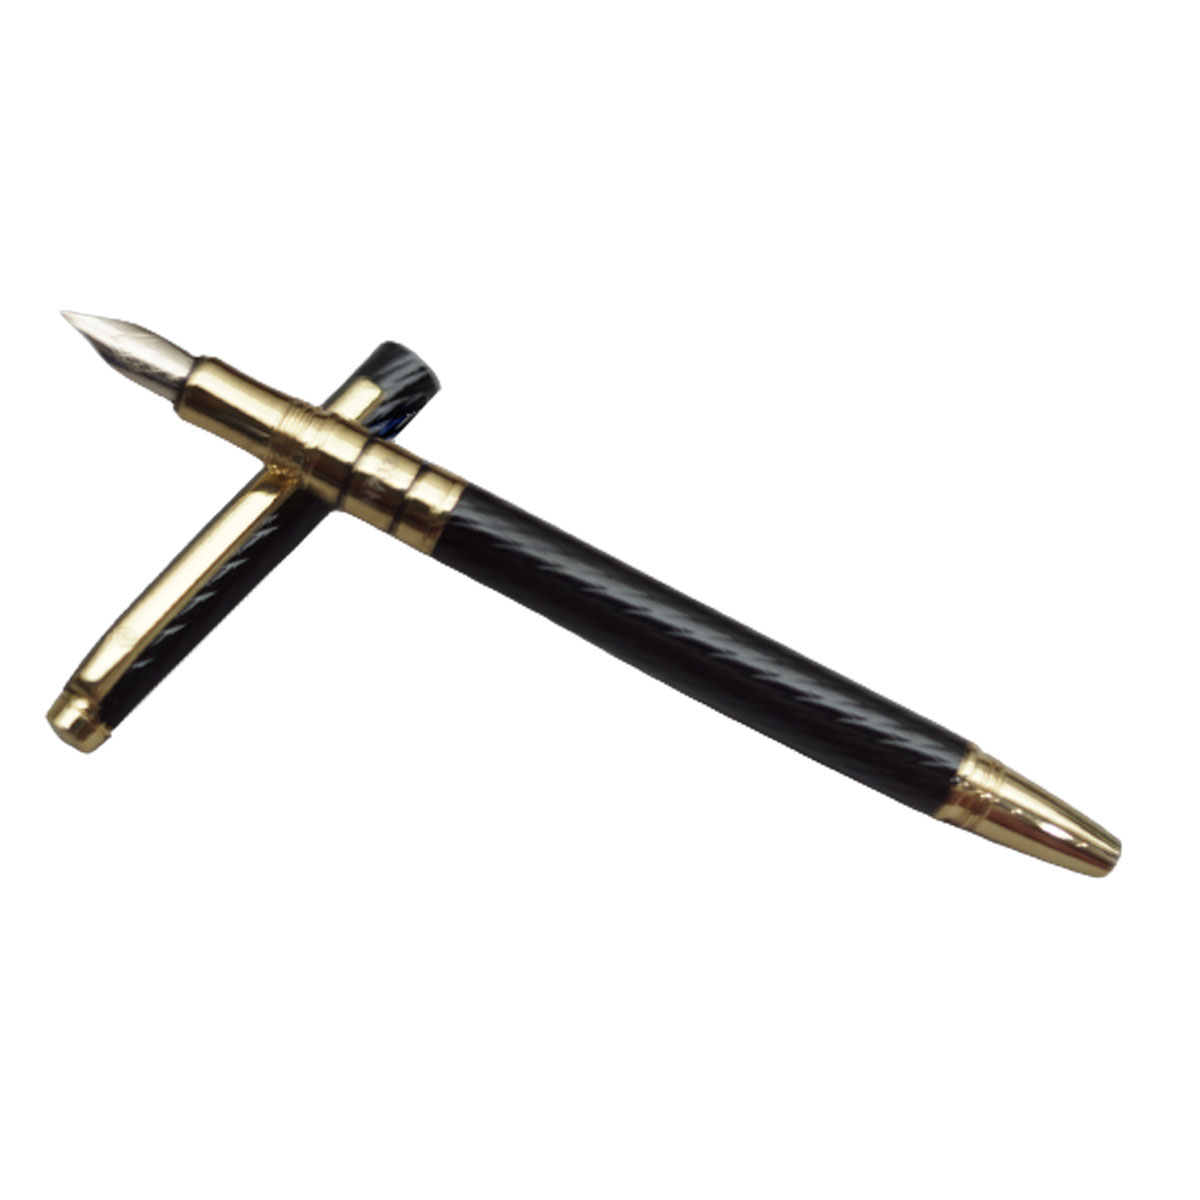 Hero 703- 10K - Gold Nib  Fine Tipped  Slim converter type Fountain Pen Black Color Body and Cap with Gold Trims SKU 20242